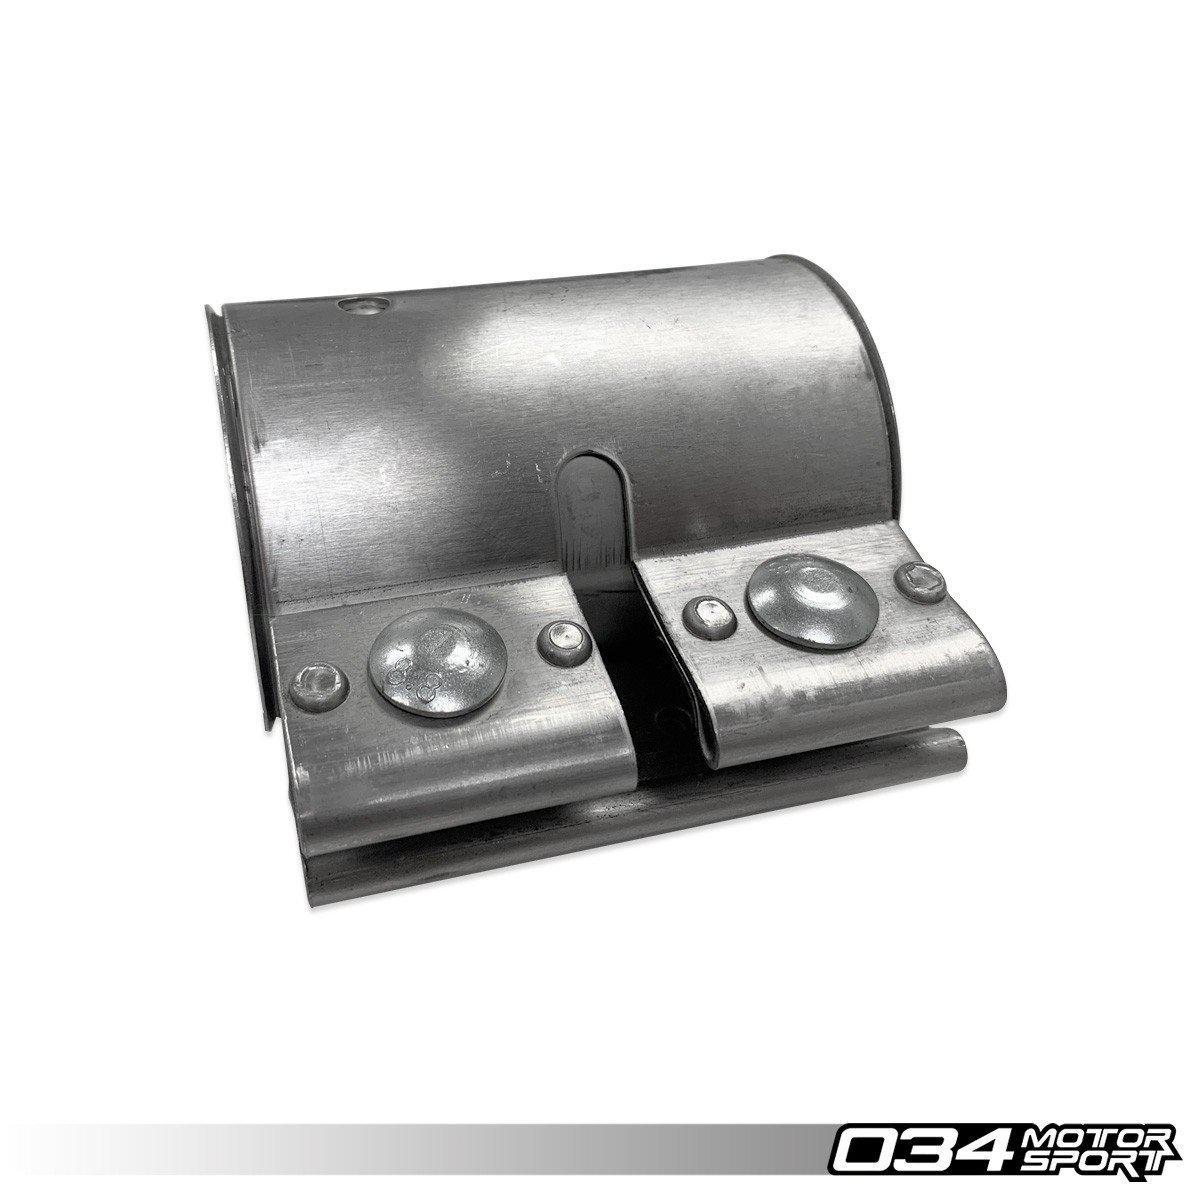 65mm Exhaust Clamp For Audi 8V A3, B9 A4/A5/Allroad, And Vw MKVII GTI-A Little Tuning Co